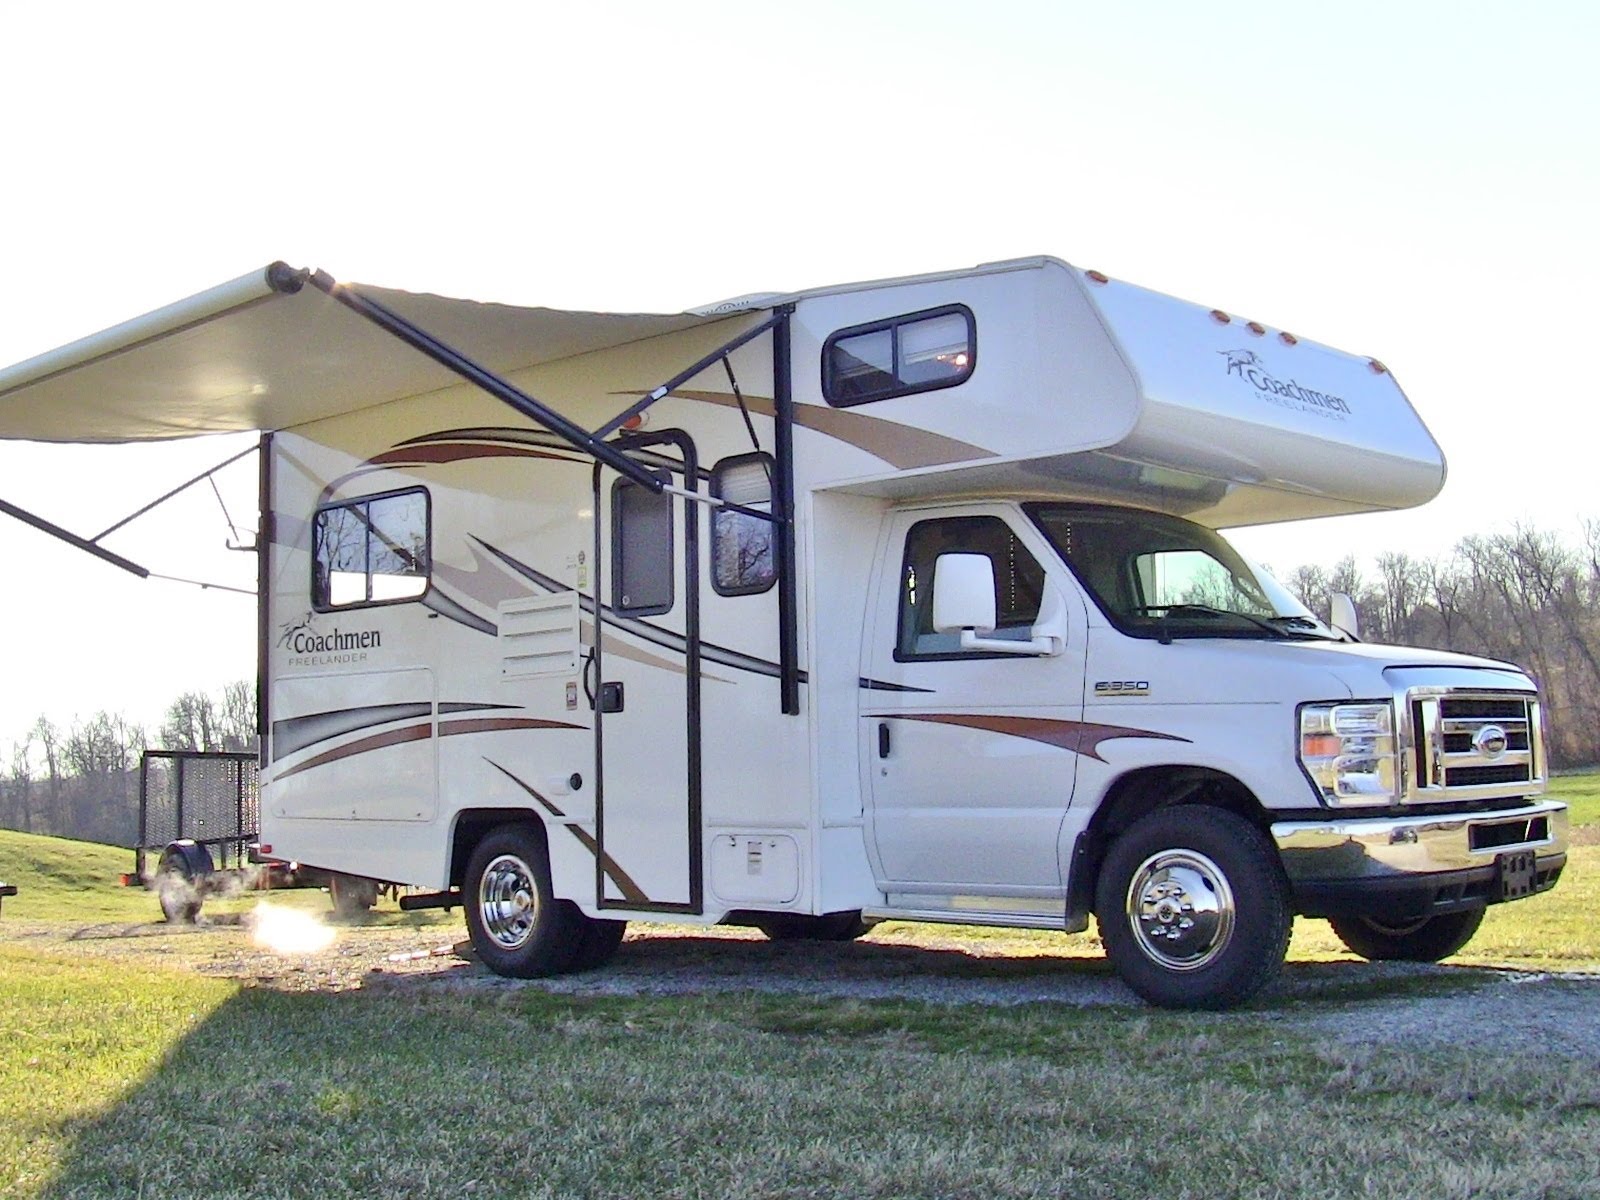 2. Cheap RVs for Sale in Texas - wide 5